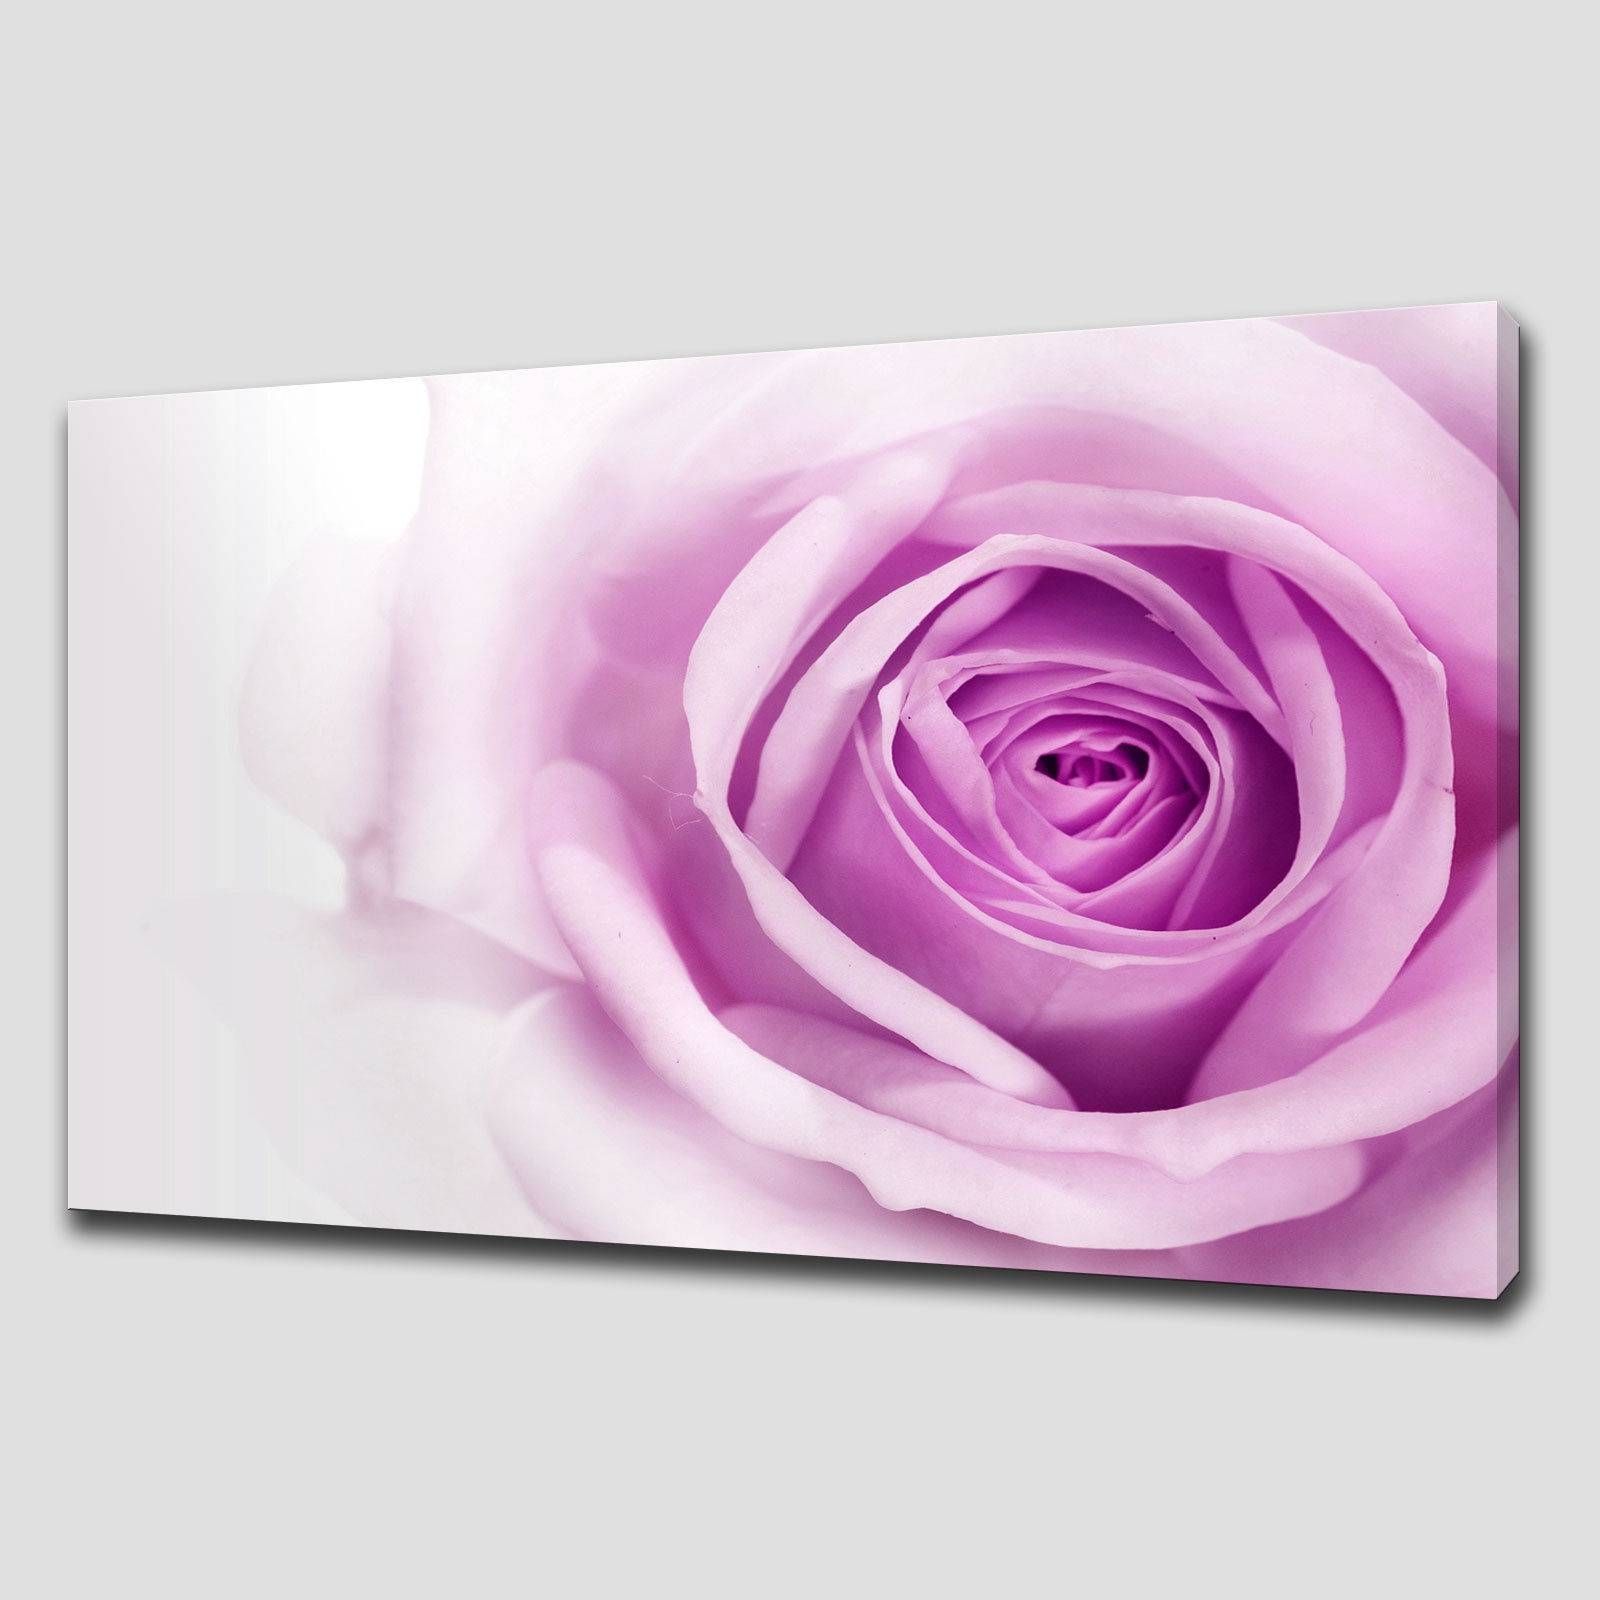 Canvas Print Pictures. High Quality, Handmade, Free Next Day Delivery (View 3 of 20)